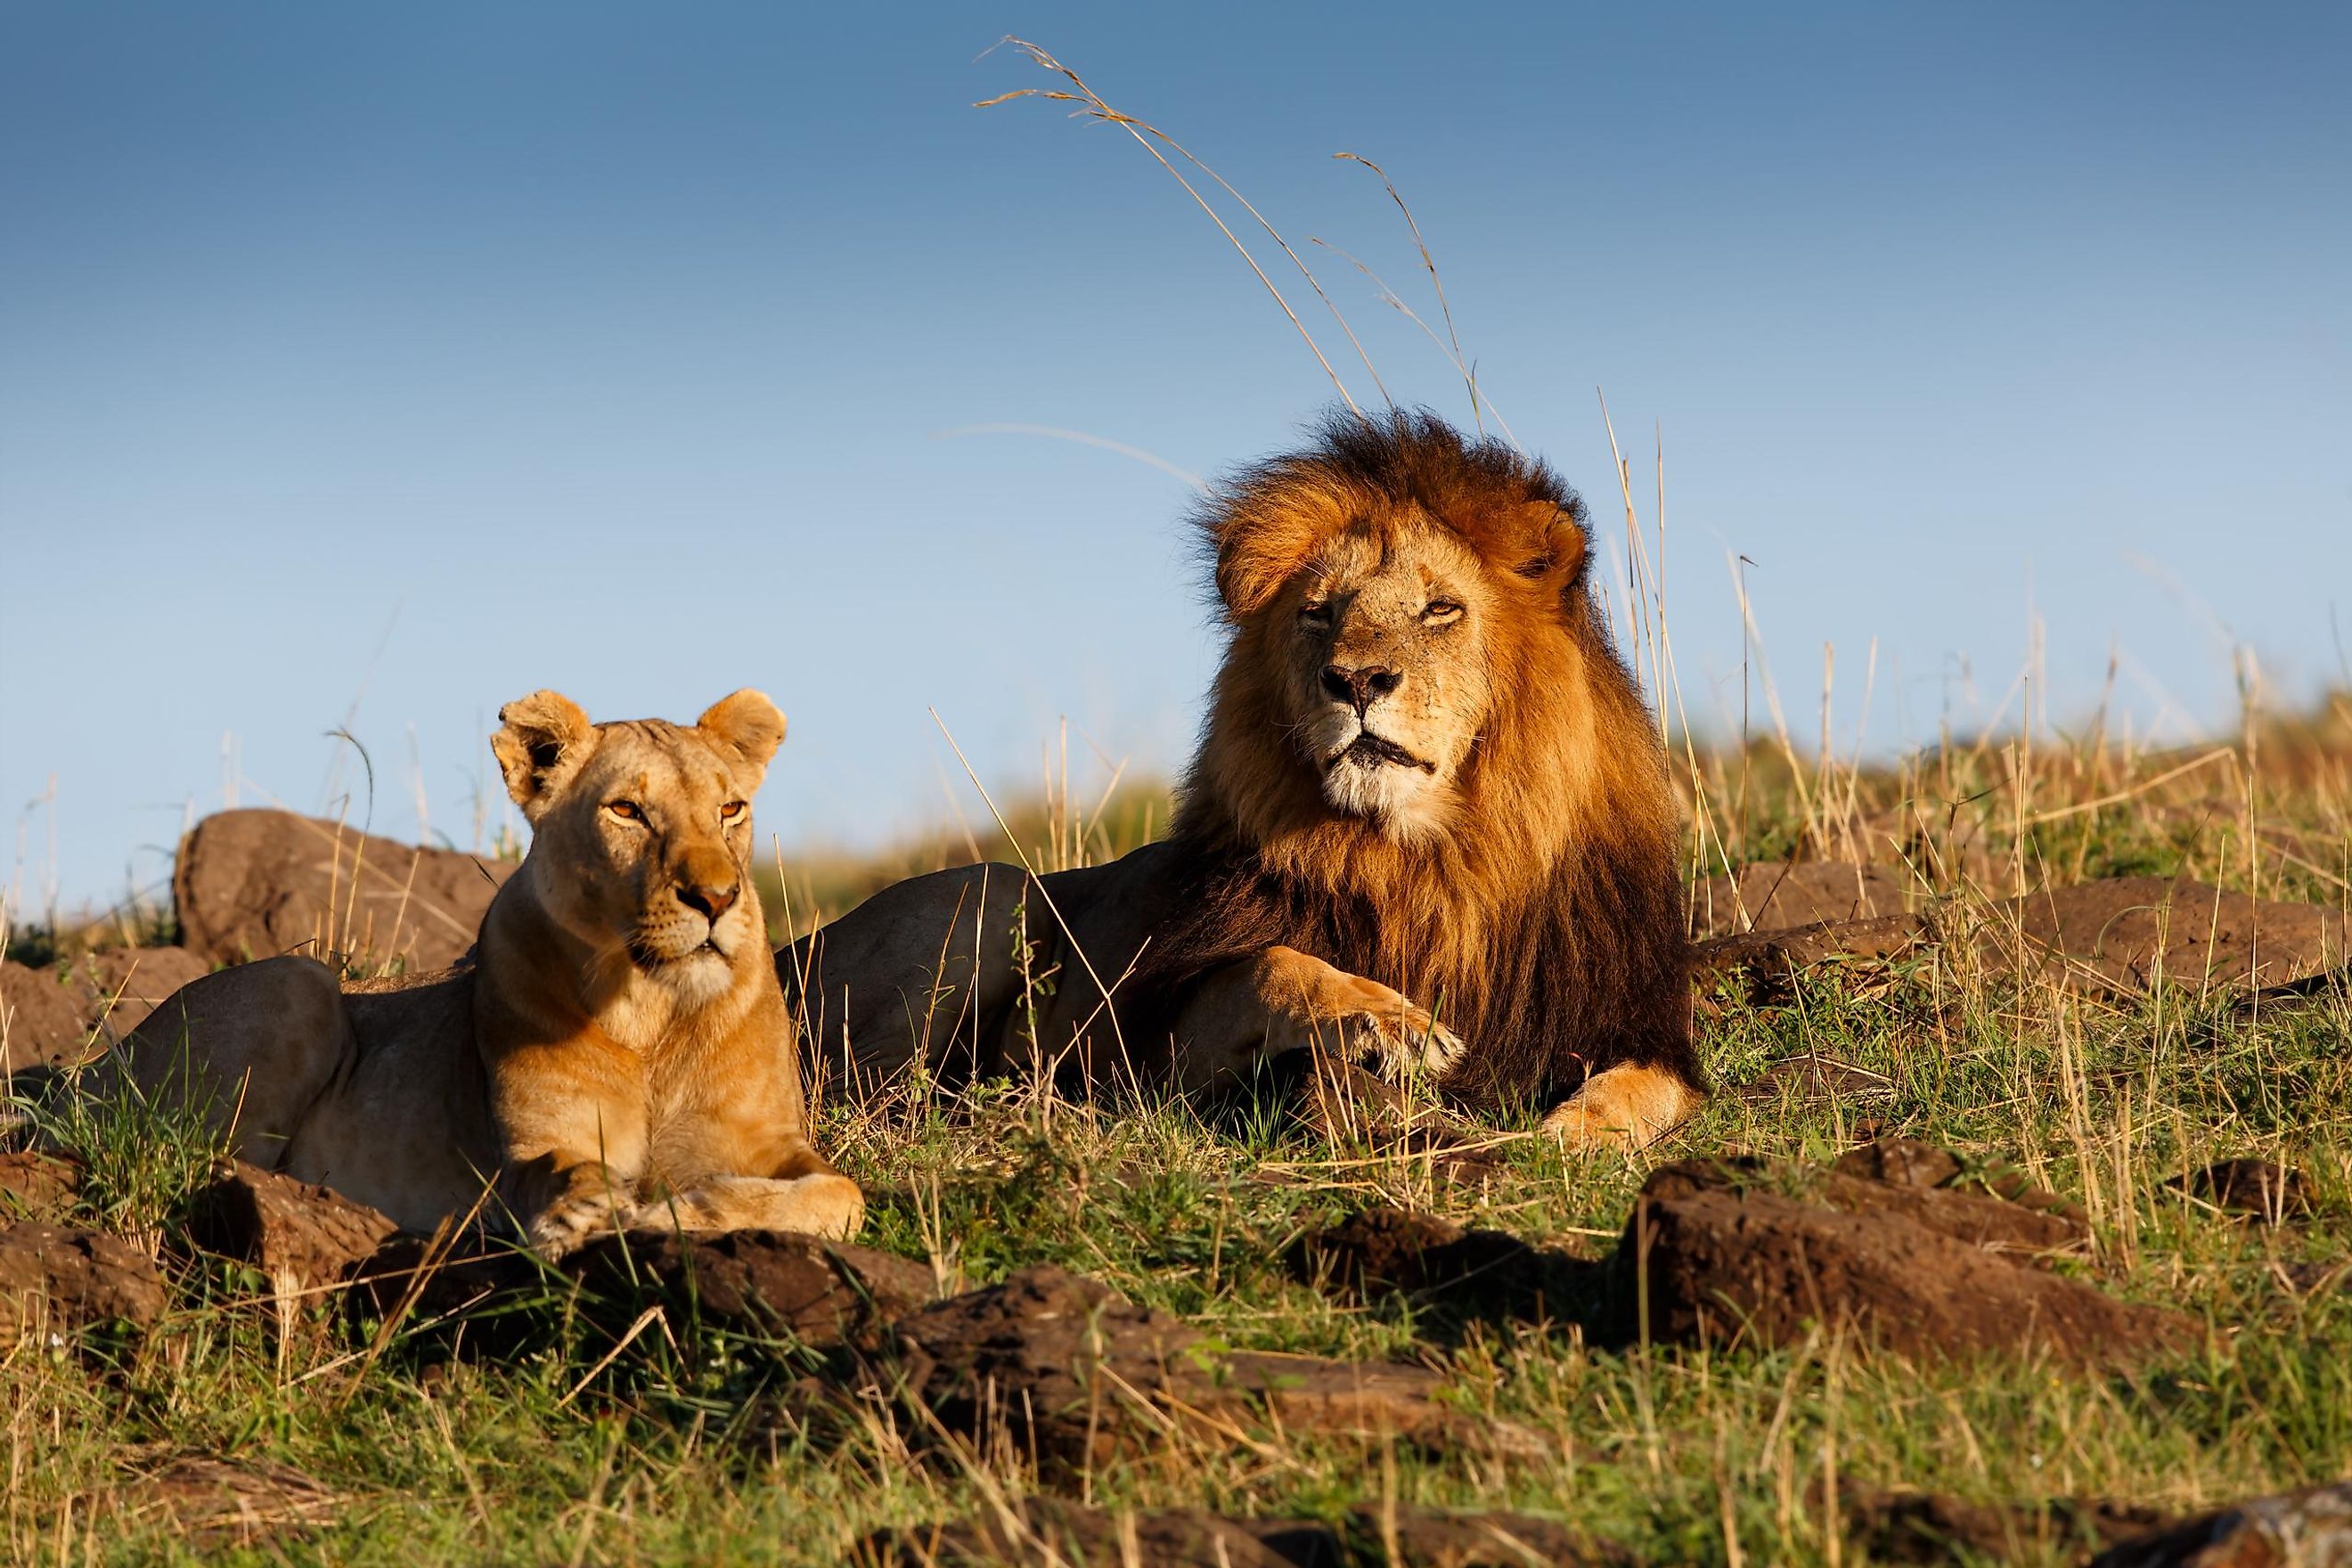 What Are The Differences Between Asiatic Lions And African Lions? - WorldAtlas